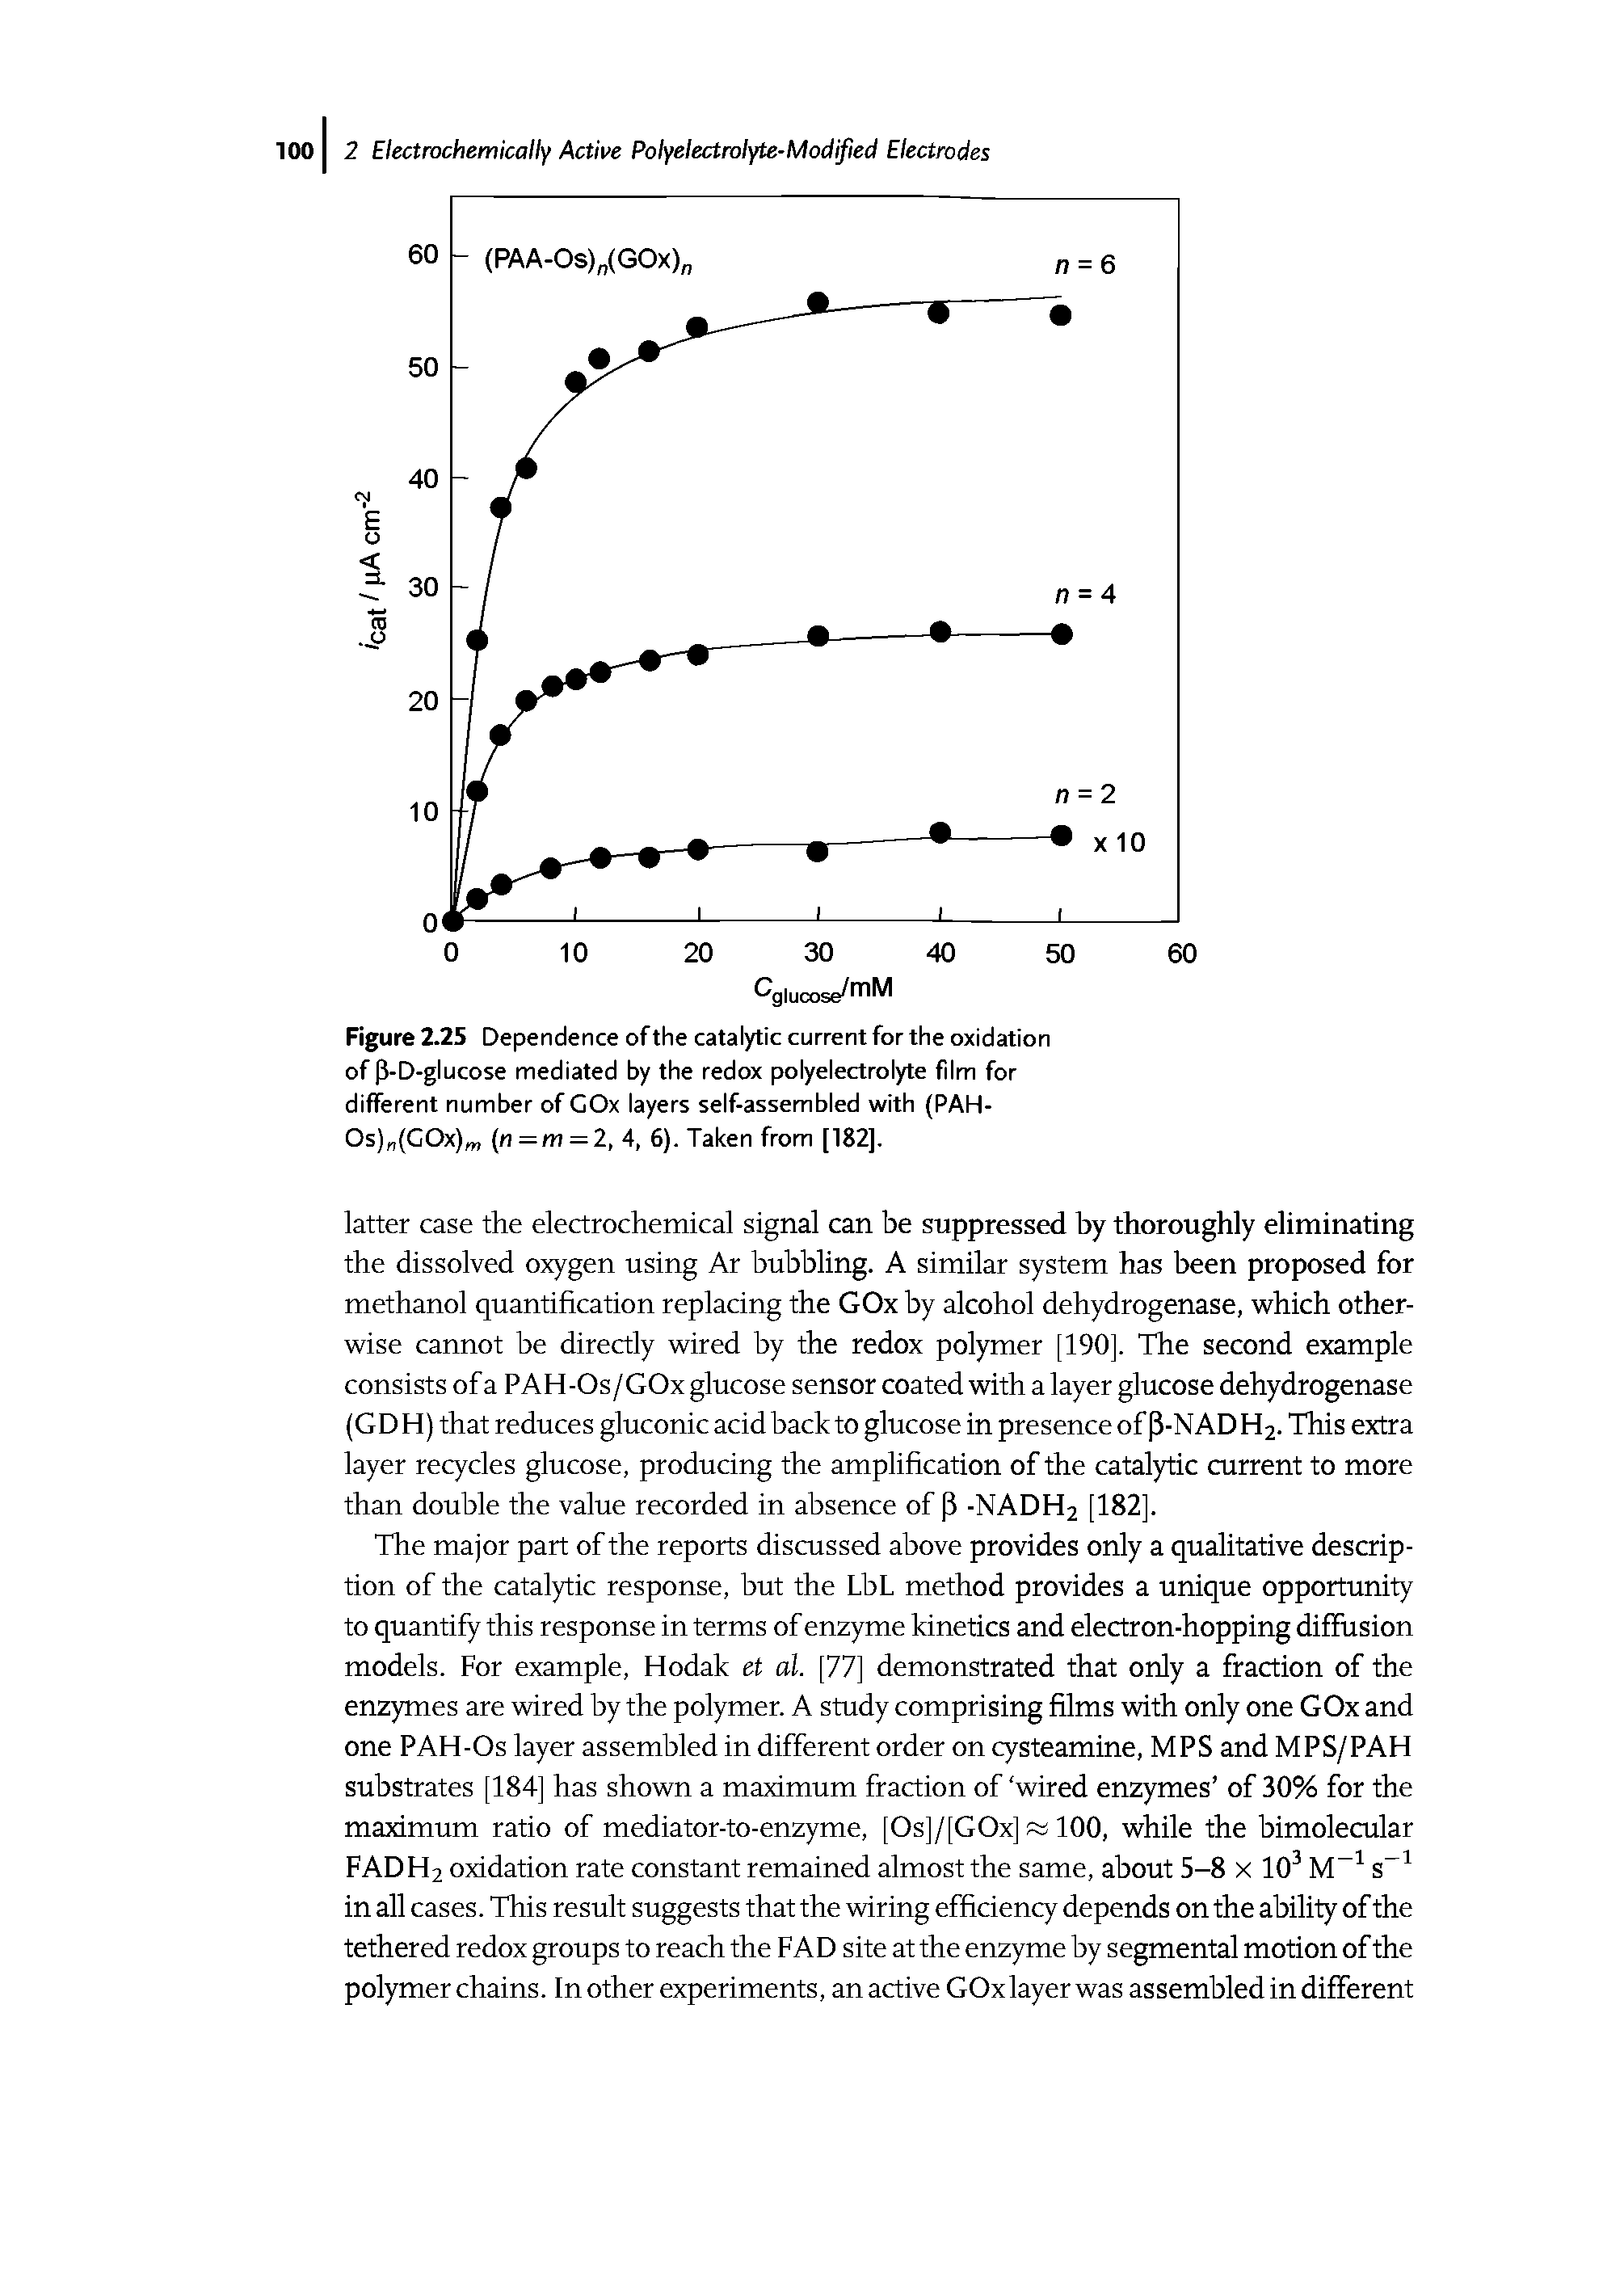 Figure 2.25 Dependence of the catalytic current for the oxidation of p-D-glucose mediated by the redox polyelectrolyte film for different number of COx layers self-assembled with (PAH-Os) (COx) (n=m = 2, 4, 6). Taken from [182].